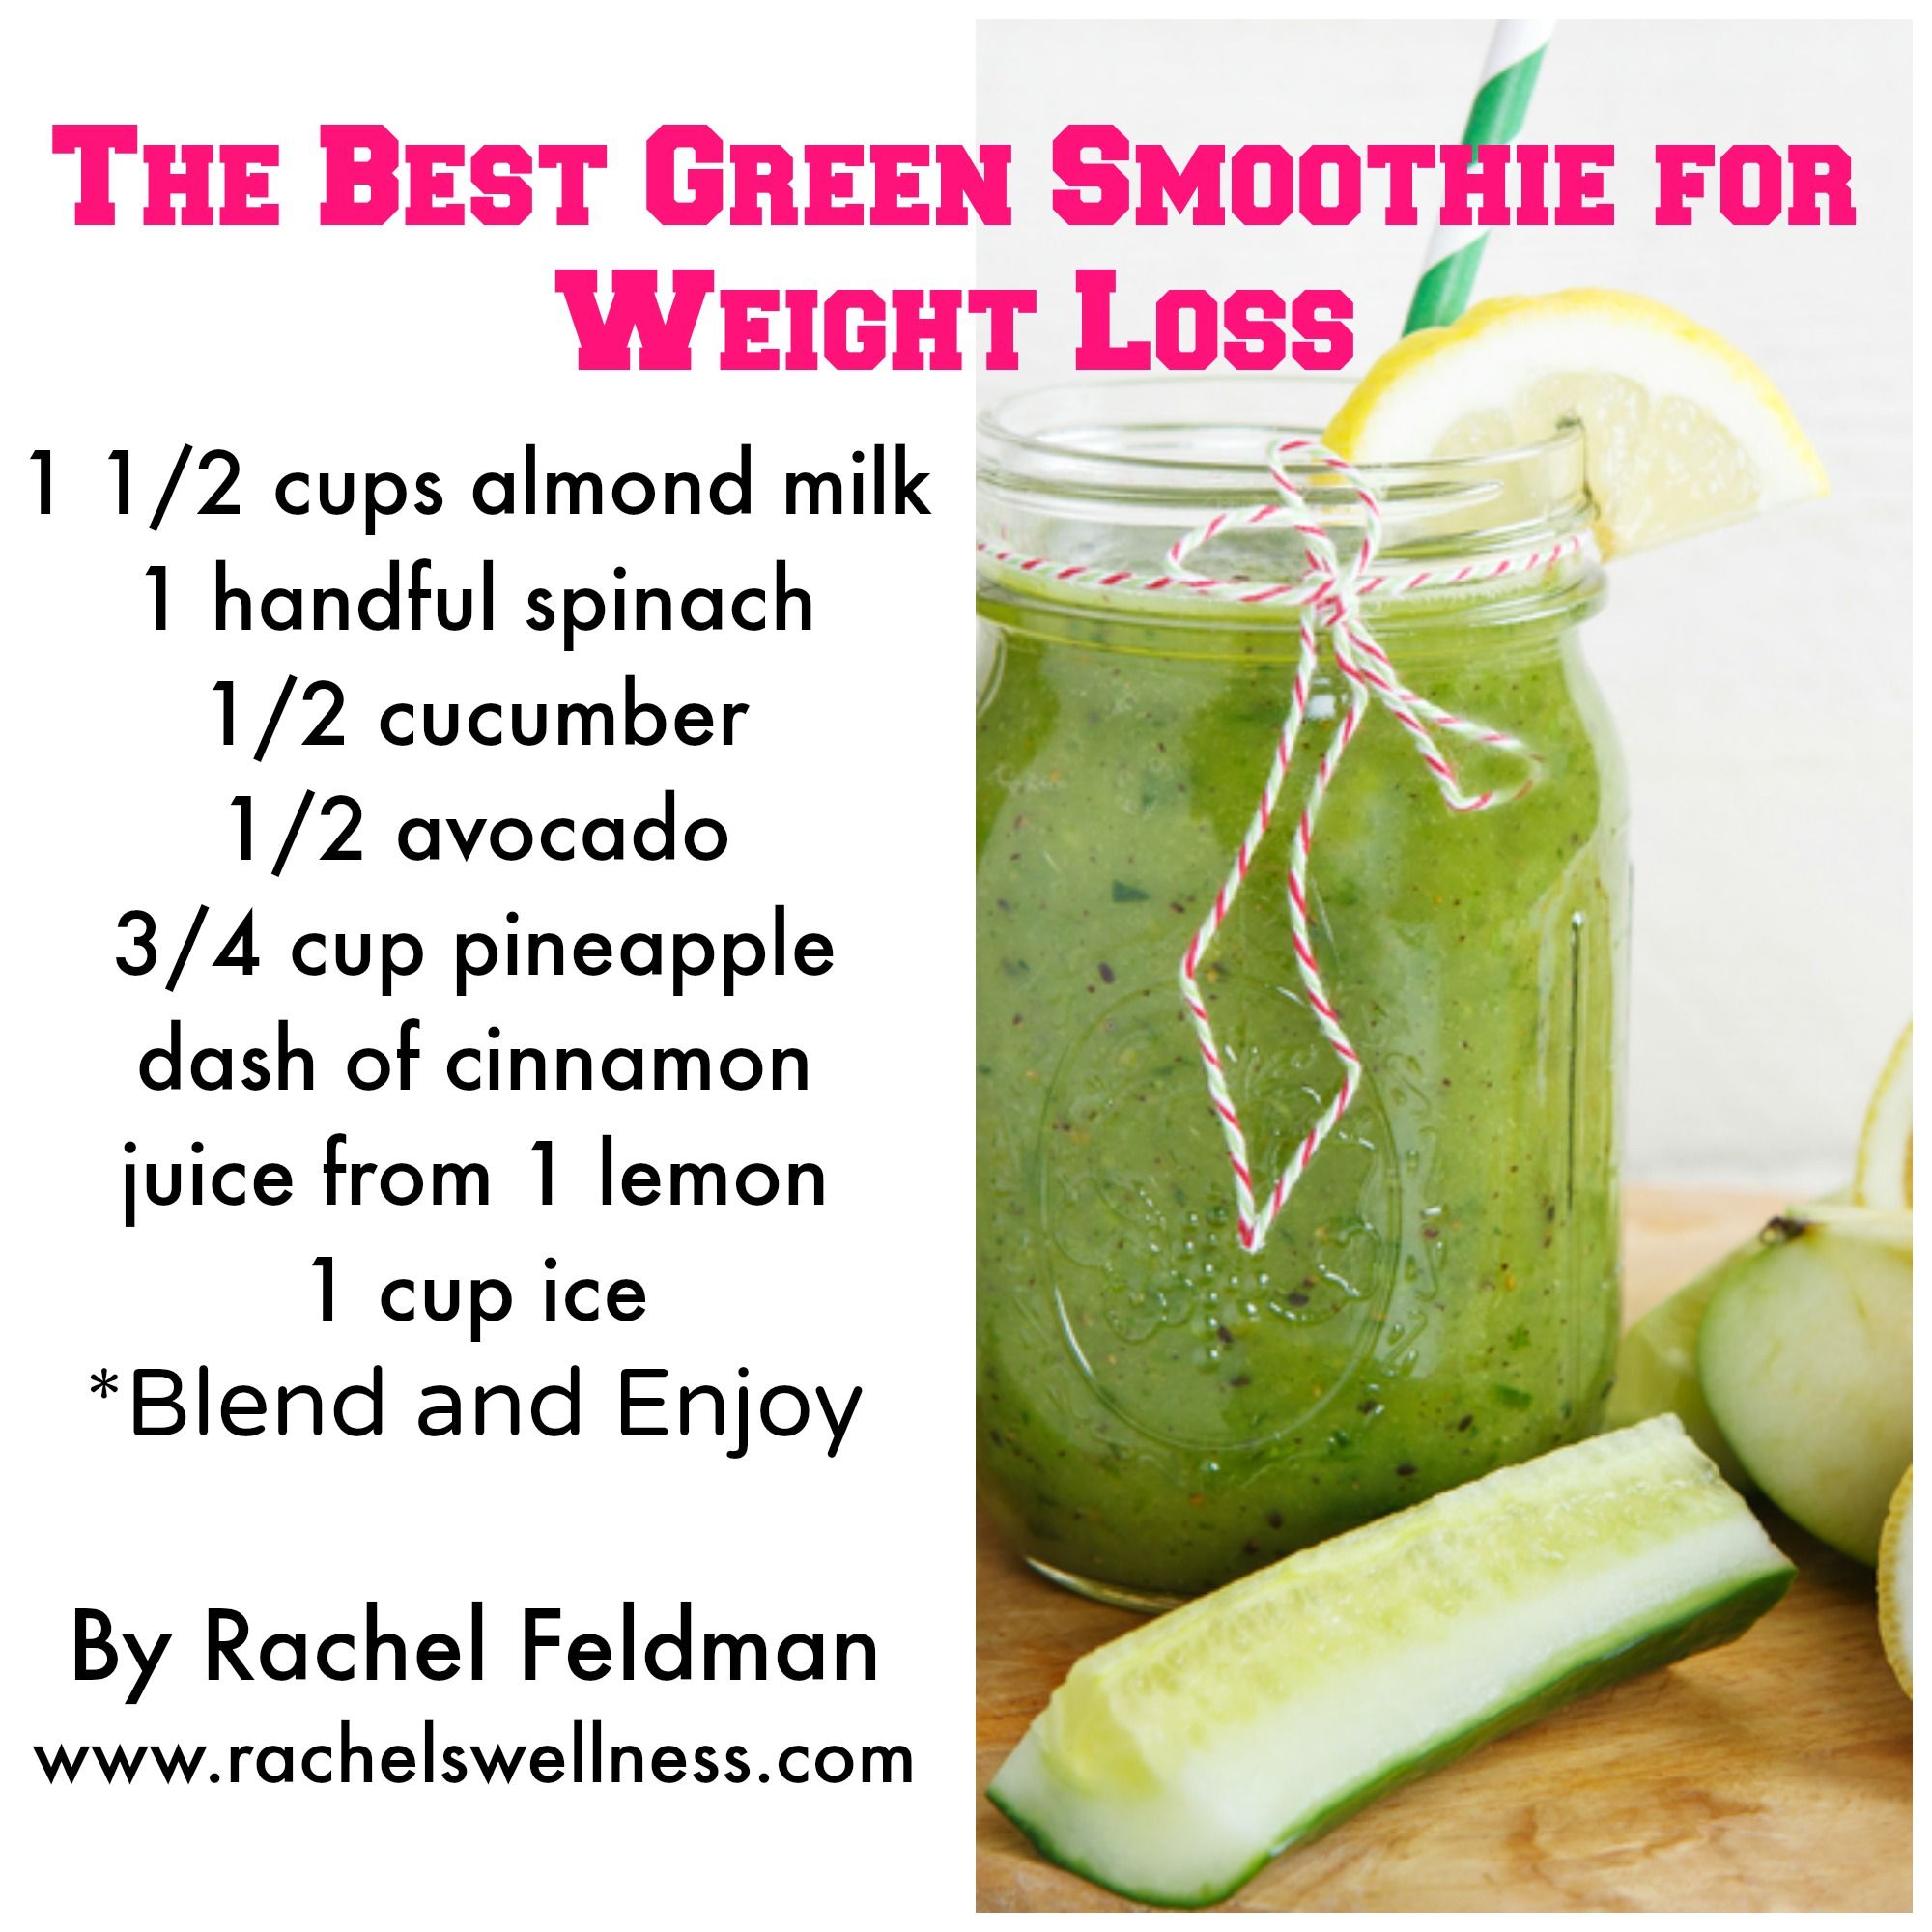 7 Healthy Green Smoothie Recipes for Weight Loss